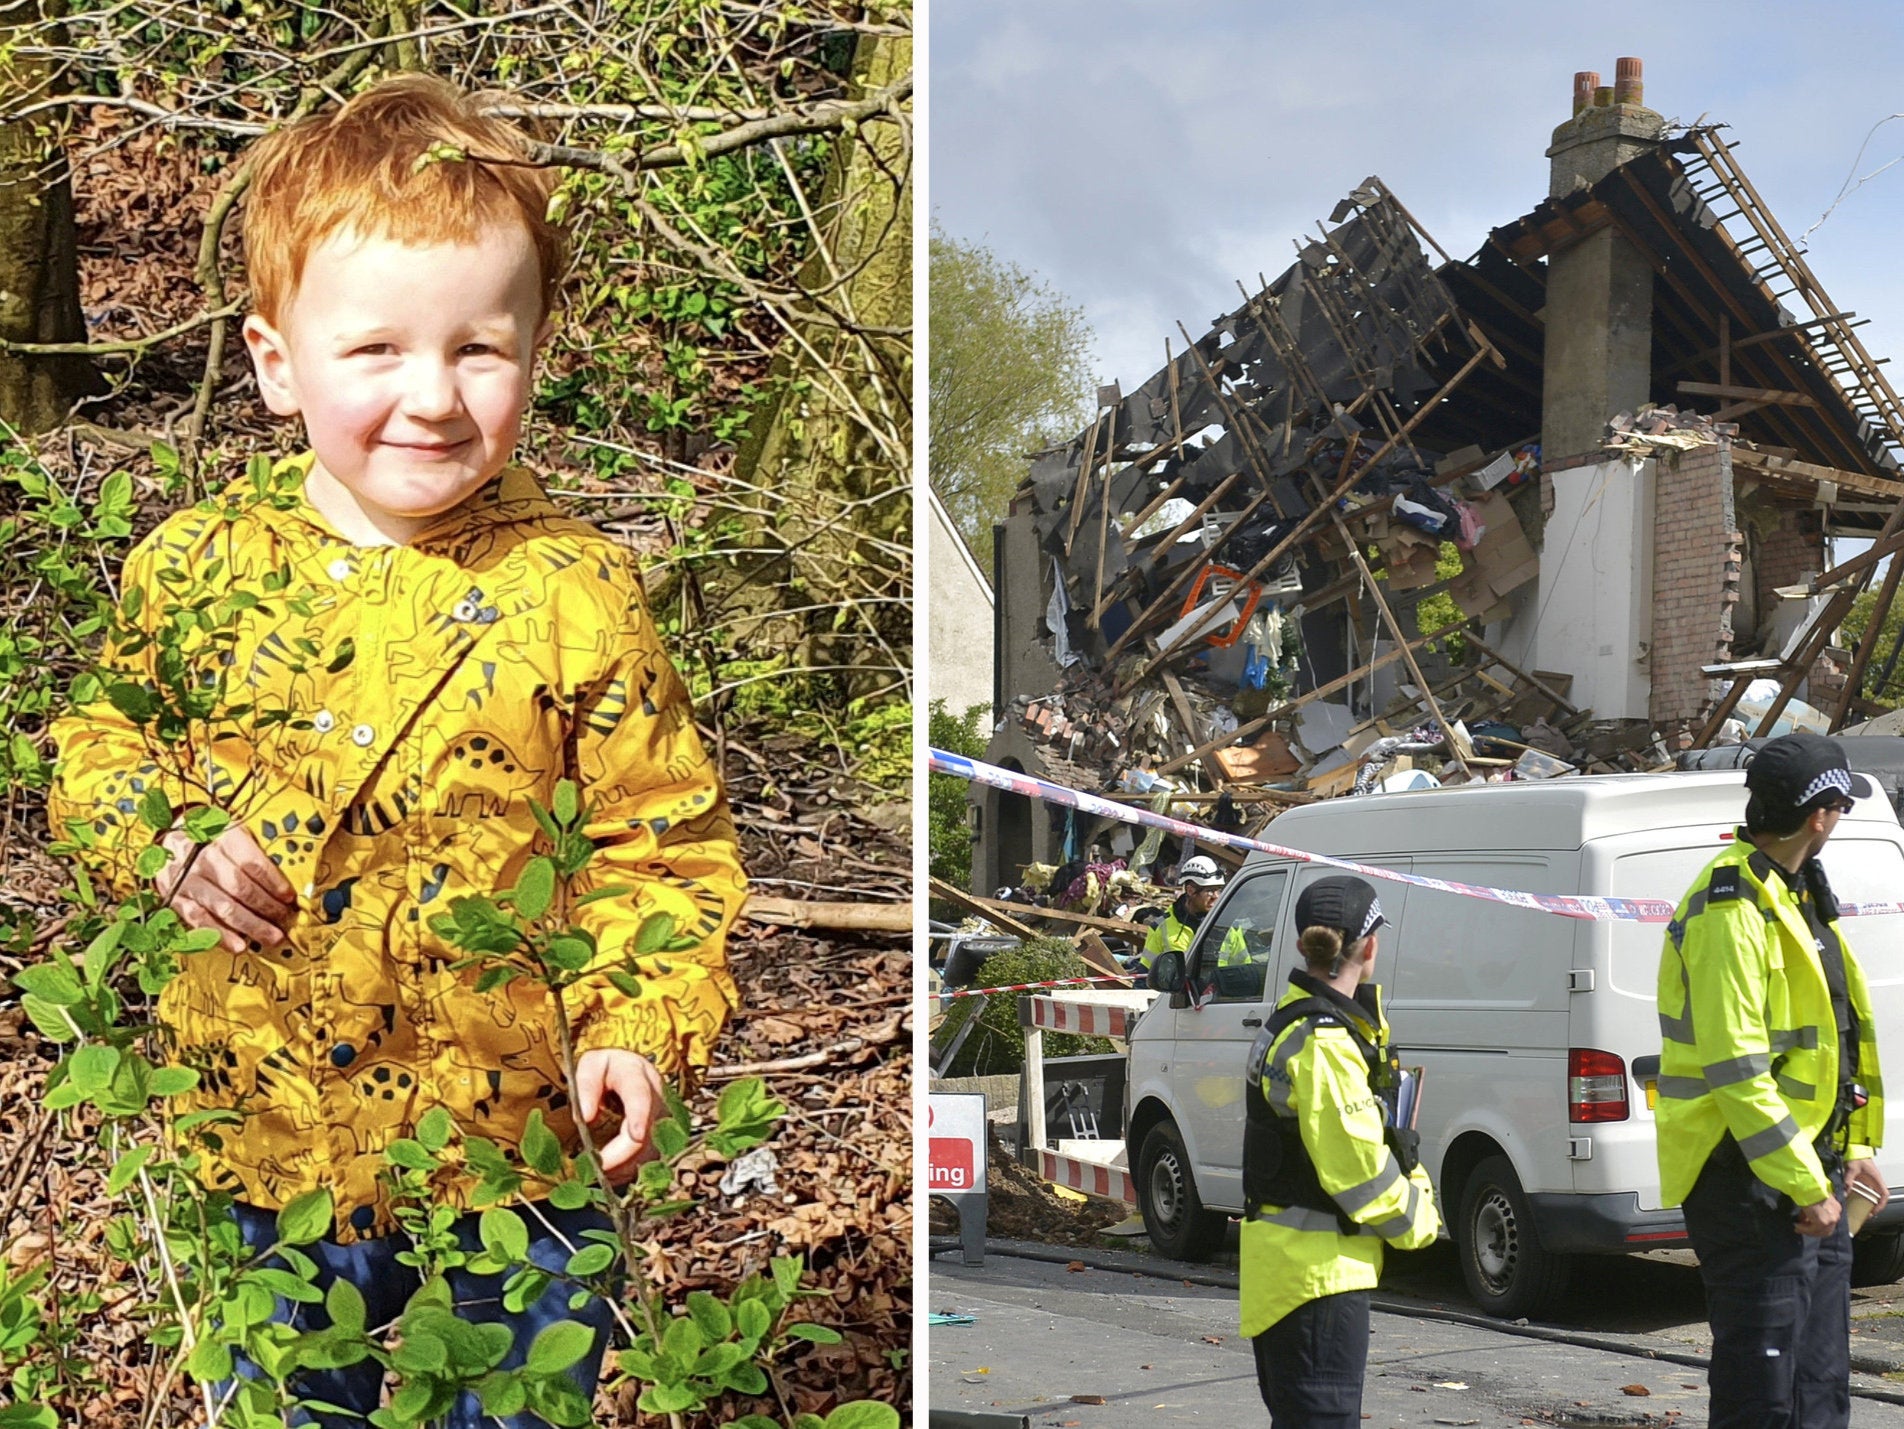 George Arthur Hinds, aged two years and 10 months died after a gas explosion on Mallowdale Avenue